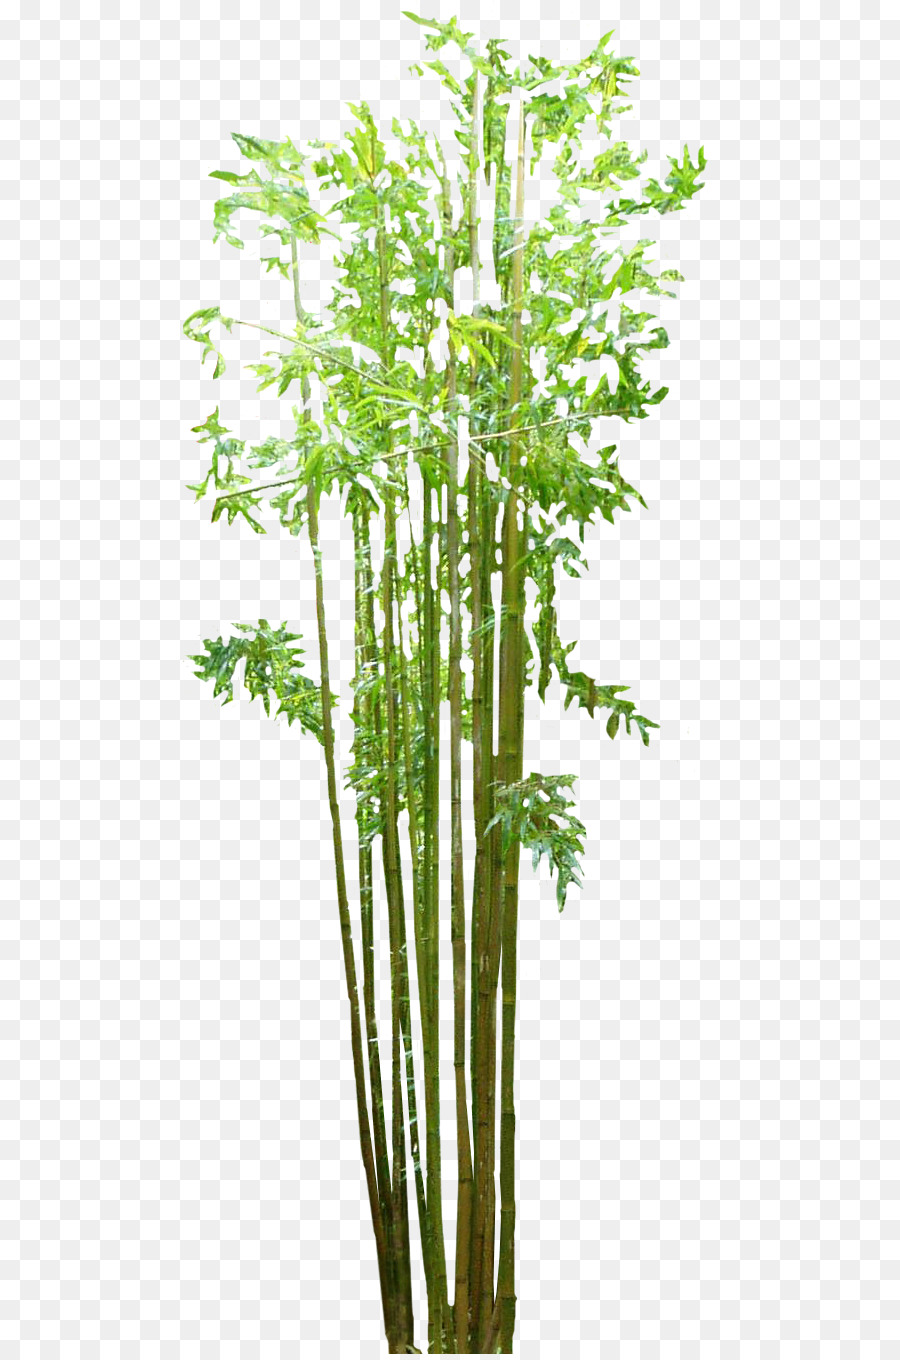 Bamboo floor - Bamboo PNG Image png download - 544*1354 - Free Transparent Bamboo png Download.